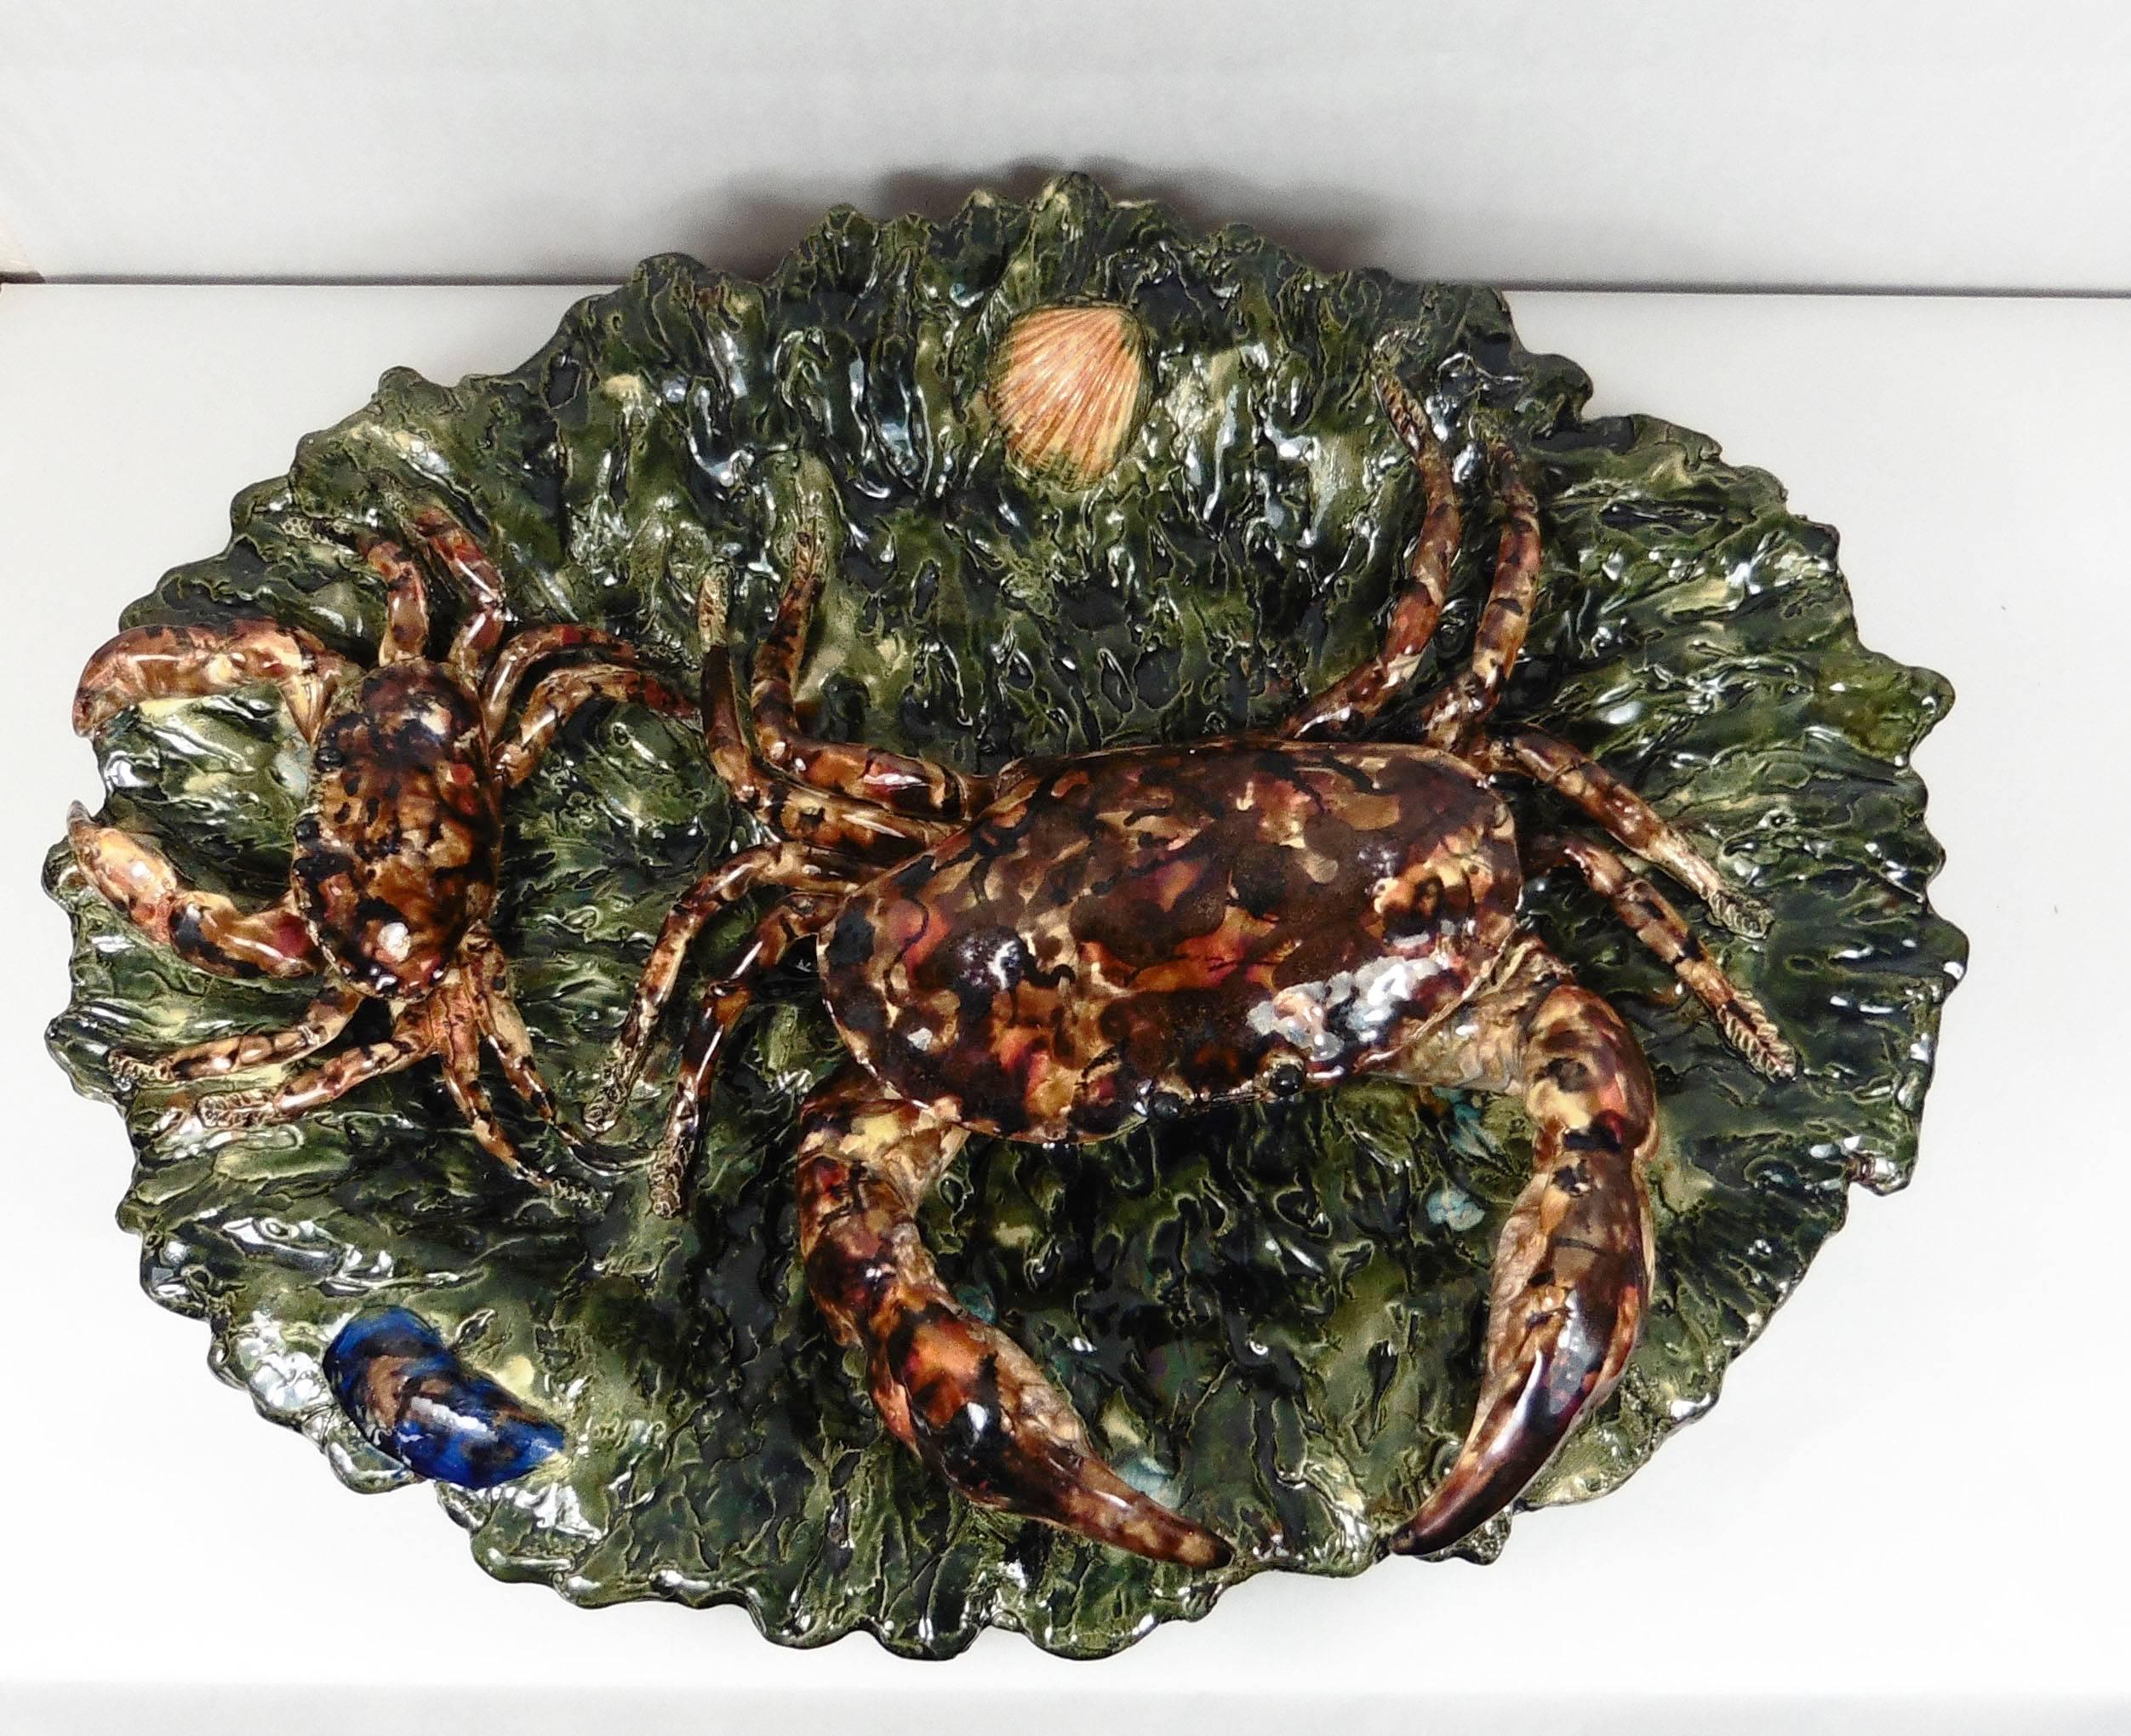 19th century Palissy crabs wall platter signed Alfred Renoleau dated 1891-1894.
The crabs are in high relief on a green seaweeds background.
Reference/Page 179 